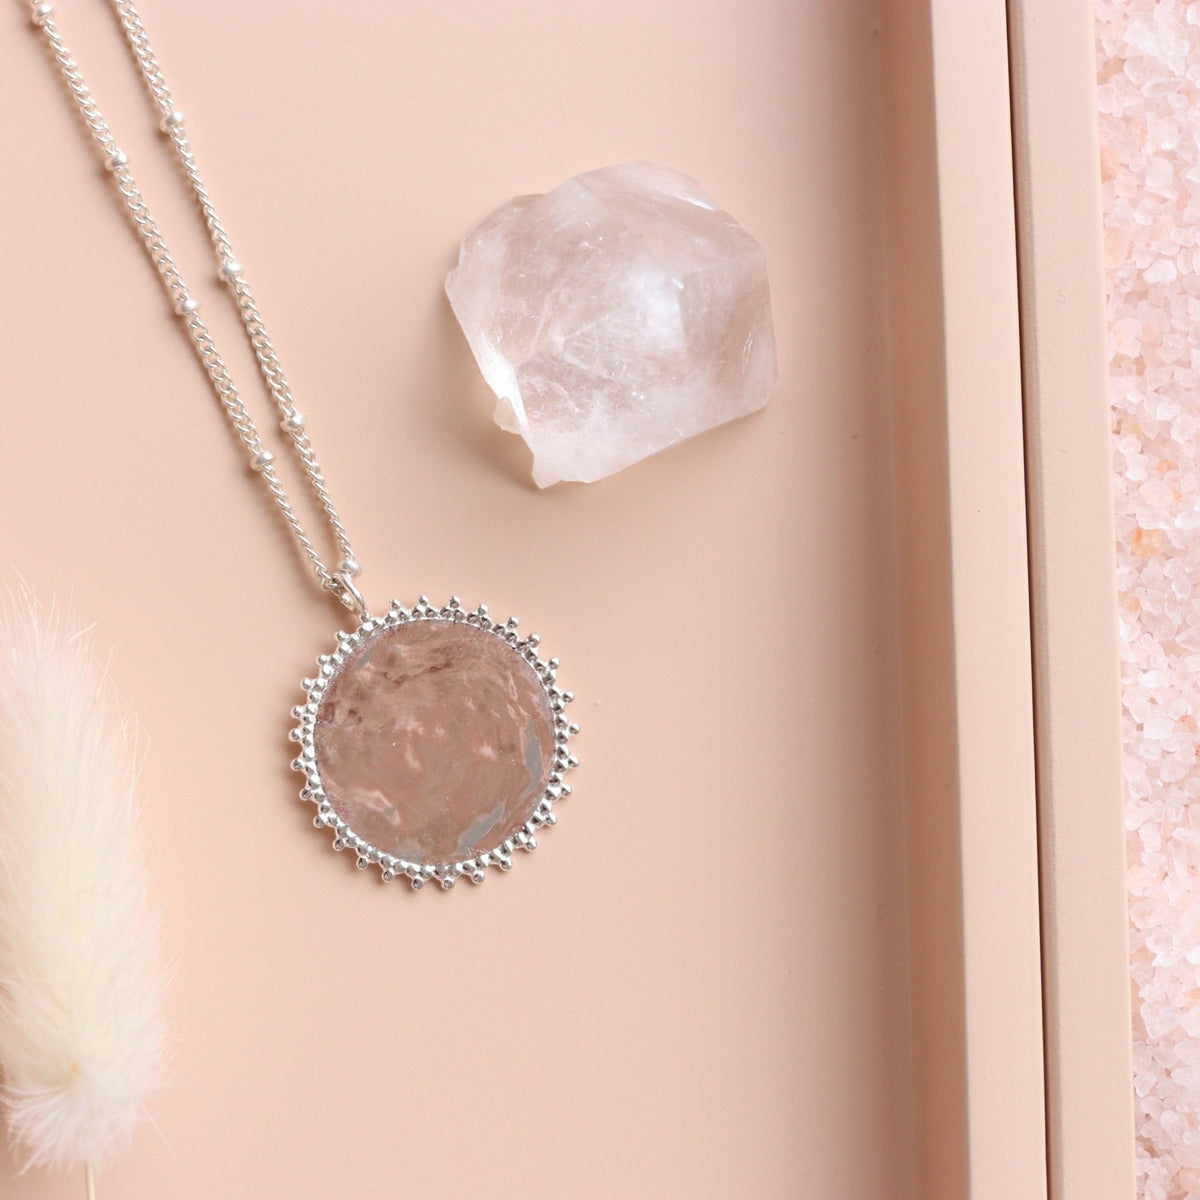 BELIEVE SOLEIL COIN PENDANT NECKLACE - SILVER - SO PRETTY CARA COTTER